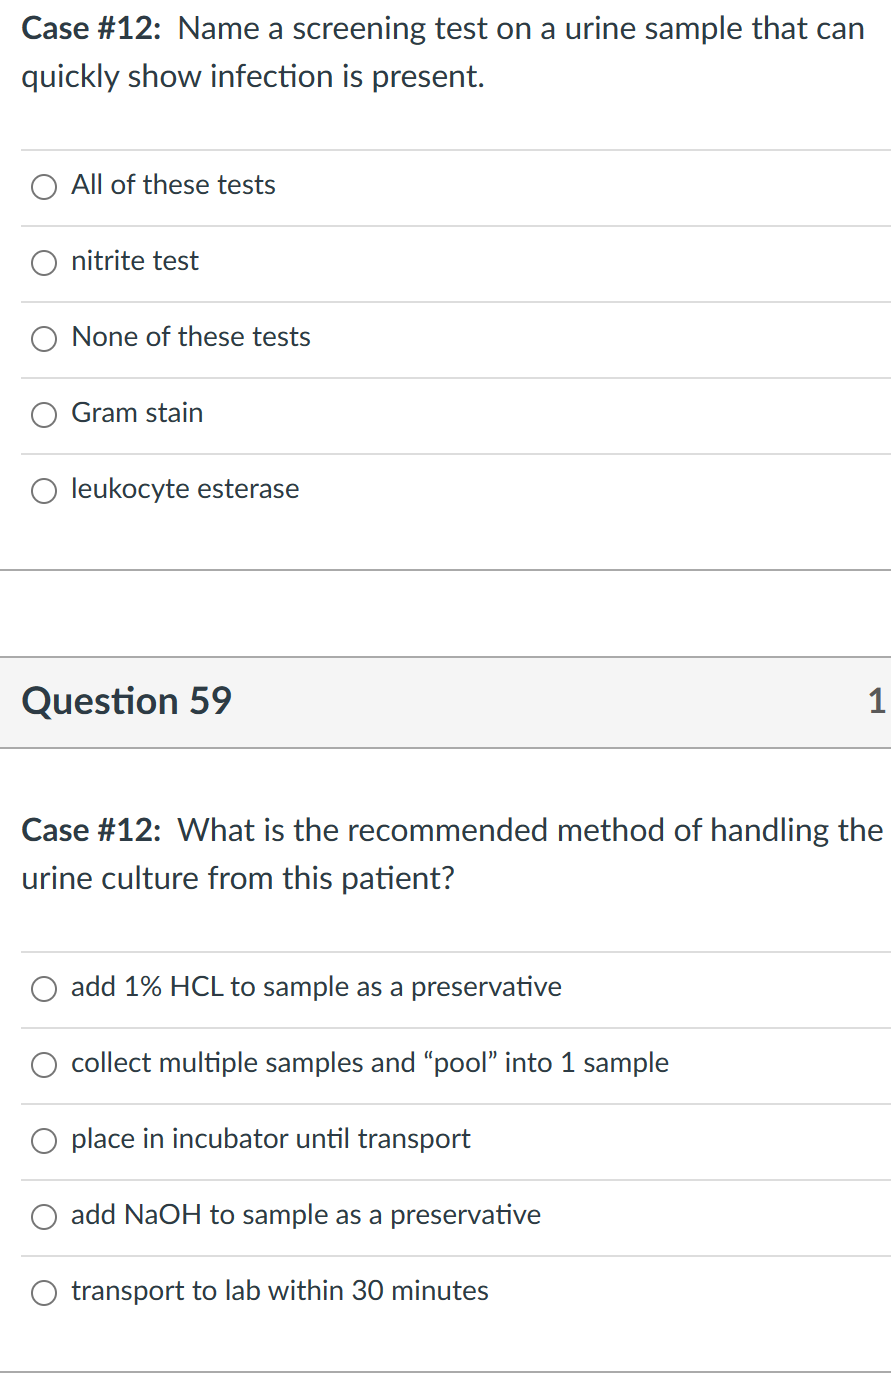 Case #12: Name a screening test on a urine sample that can
quickly show infection is present.
All of these tests
nitrite test
None of these tests
Gram stain
leukocyte esterase
Question 59
Case #12: What is the recommended method of handling the
urine culture from this patient?
add 1% HCL to sample as a preservative
collect multiple samples and "pool" into 1 sample
place in incubator until transport
add NaOH to sample as a preservative
transport to lab within 30 minutes